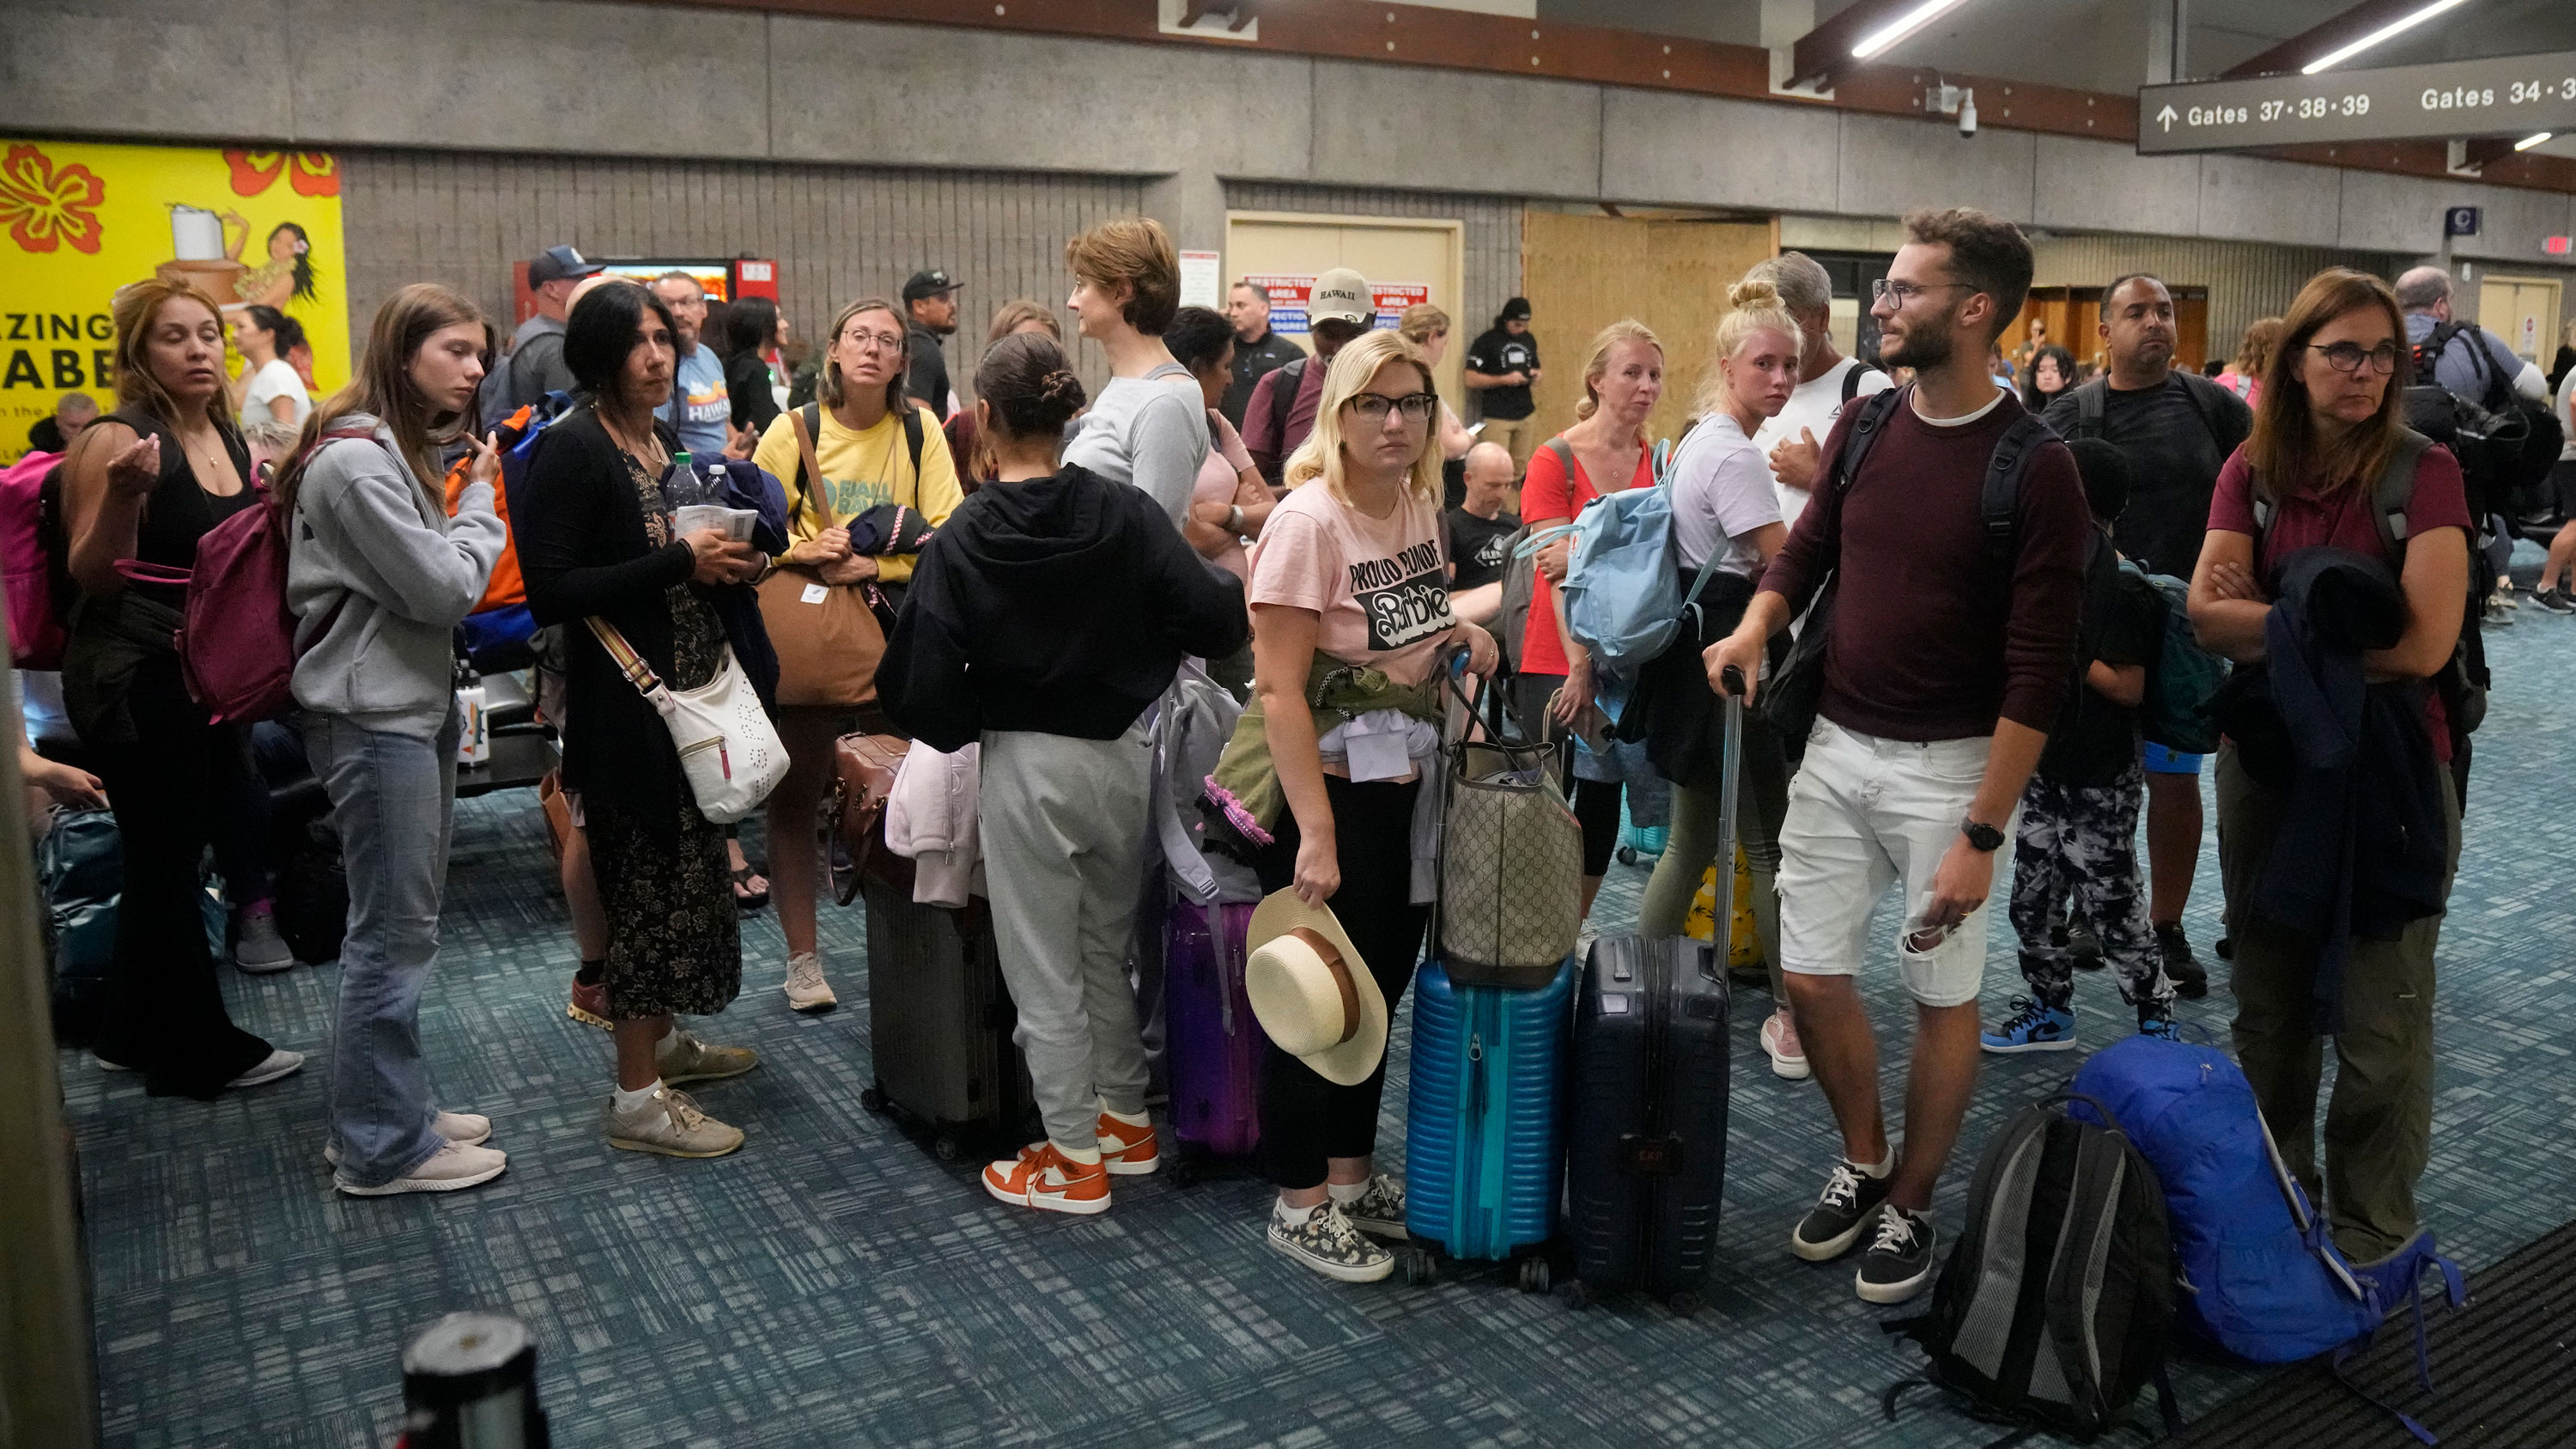 People gather while waiting for flights at the Kahului Airport in Kahului, Hawaii on August 9.